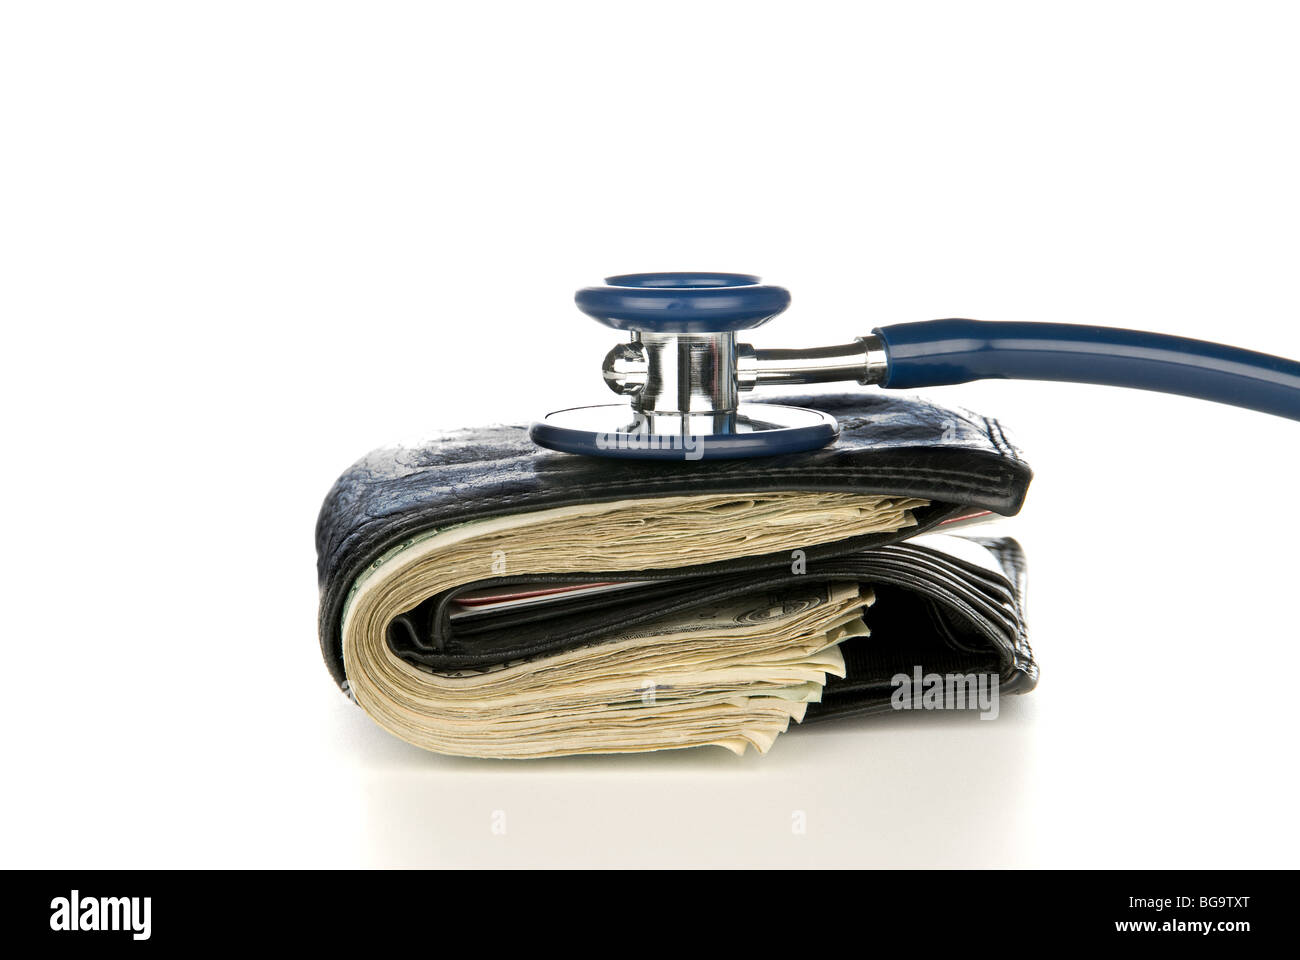 A leather wallet being examined with a stethoscope. Good for medical and financial inferences, high costs, being broke. Stock Photo